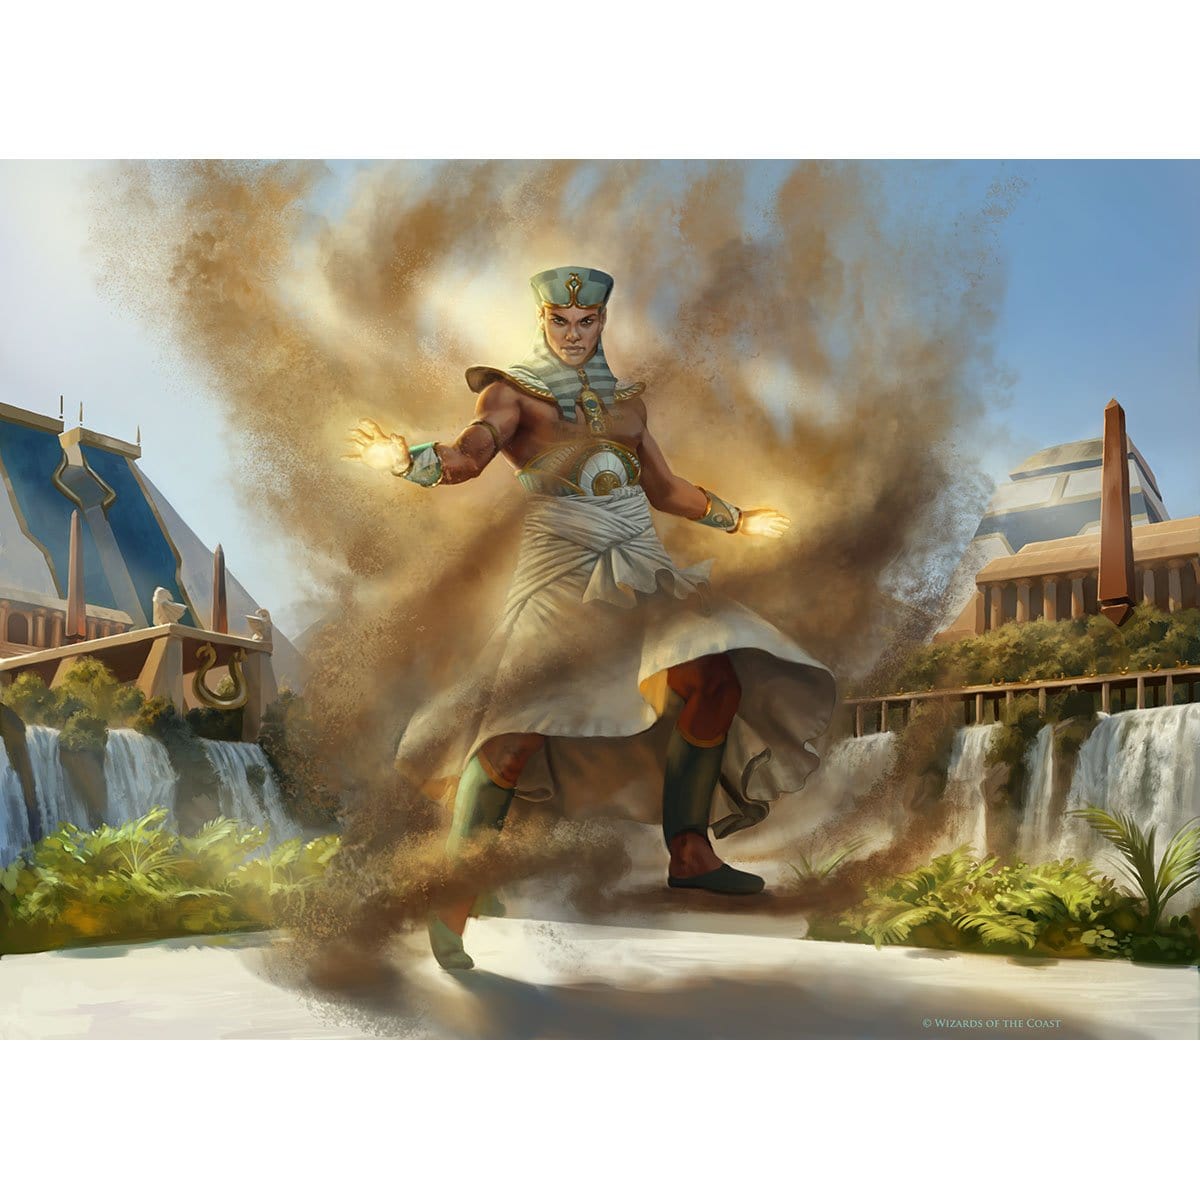 Gust Walker Print - Print - Original Magic Art - Accessories for Magic the Gathering and other card games